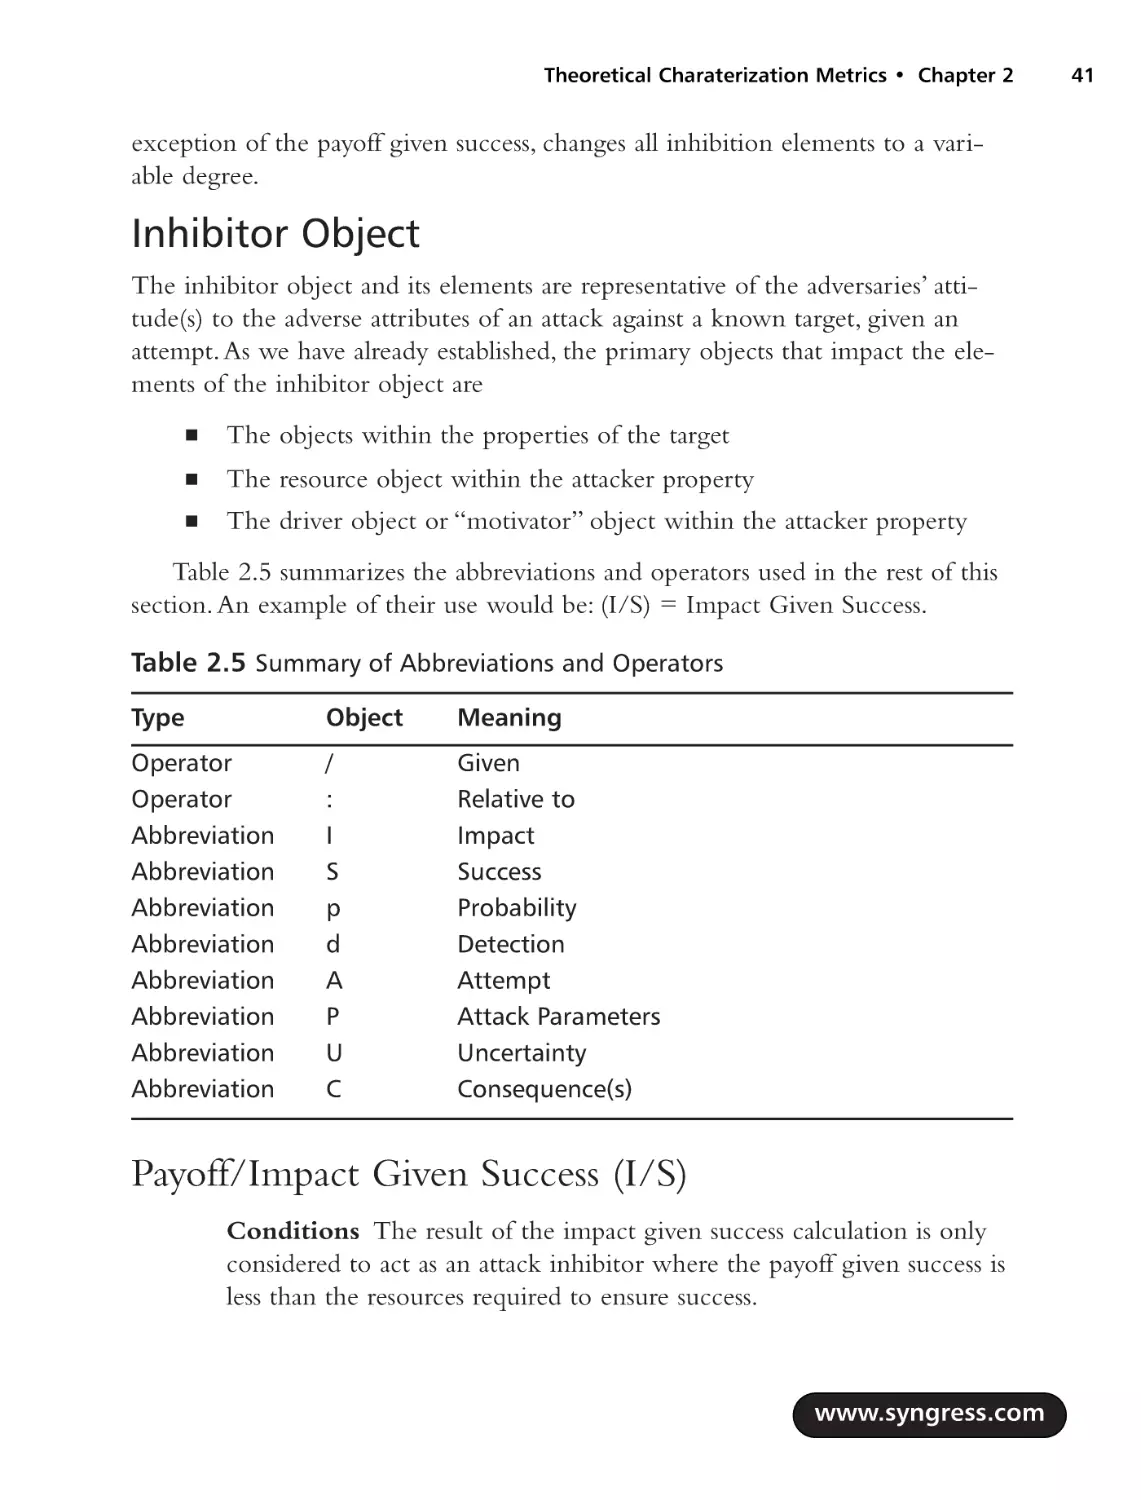 Inhibitor Object
Payoff/Impact Given Success (I/S)